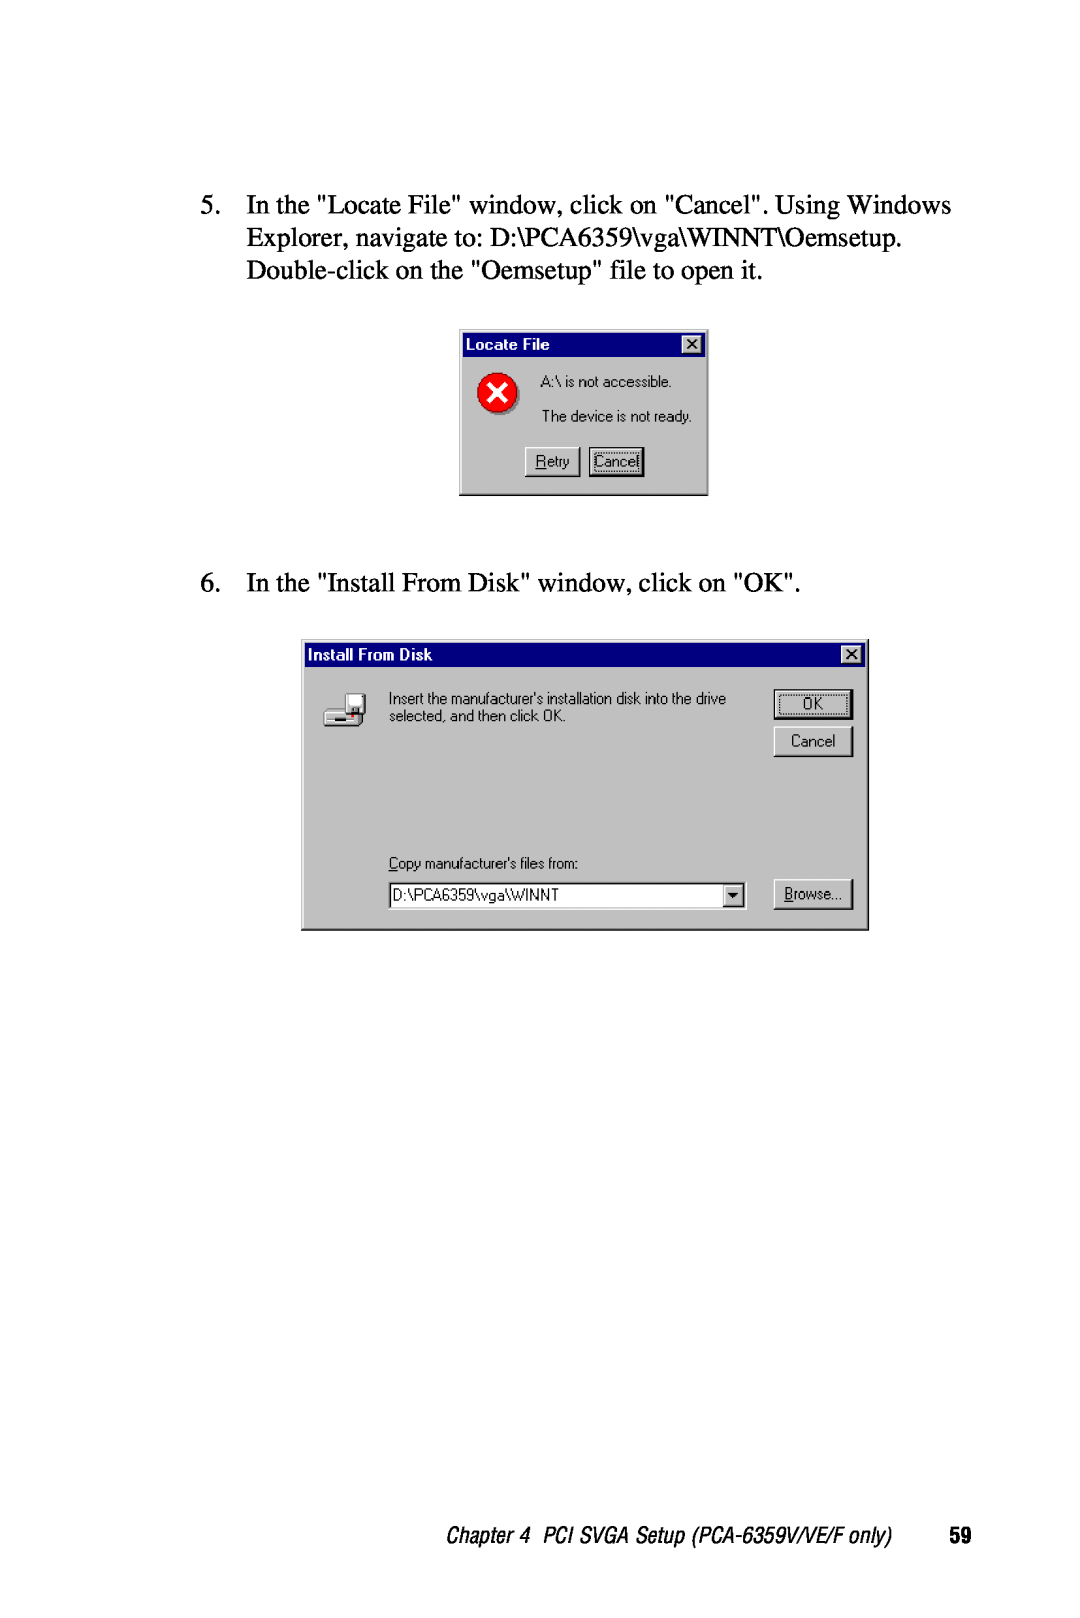 Advantech user manual In the Install From Disk window, click on OK, PCI SVGA Setup PCA-6359V/VE/F only 